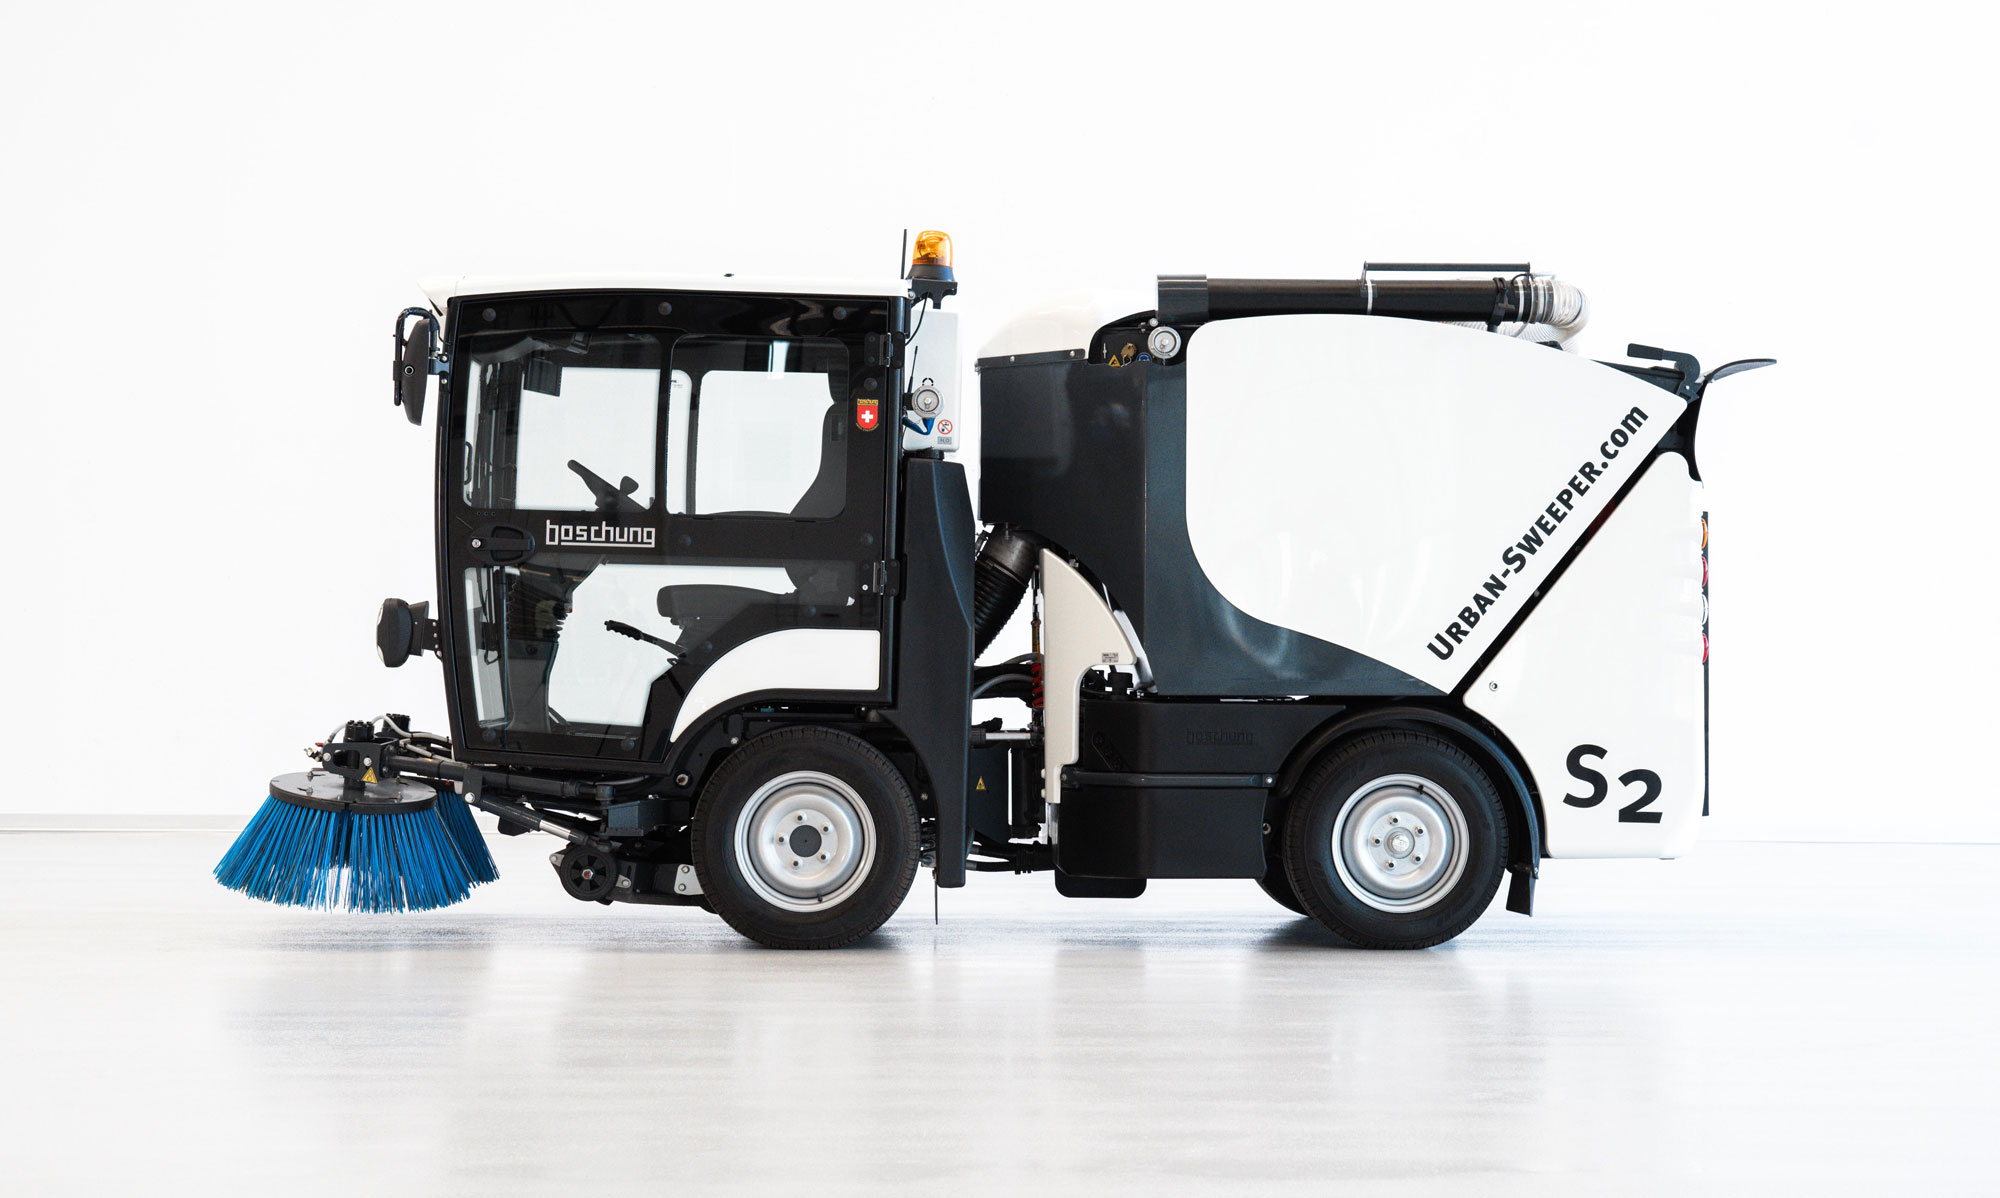 New technologies in mechanized sweepers